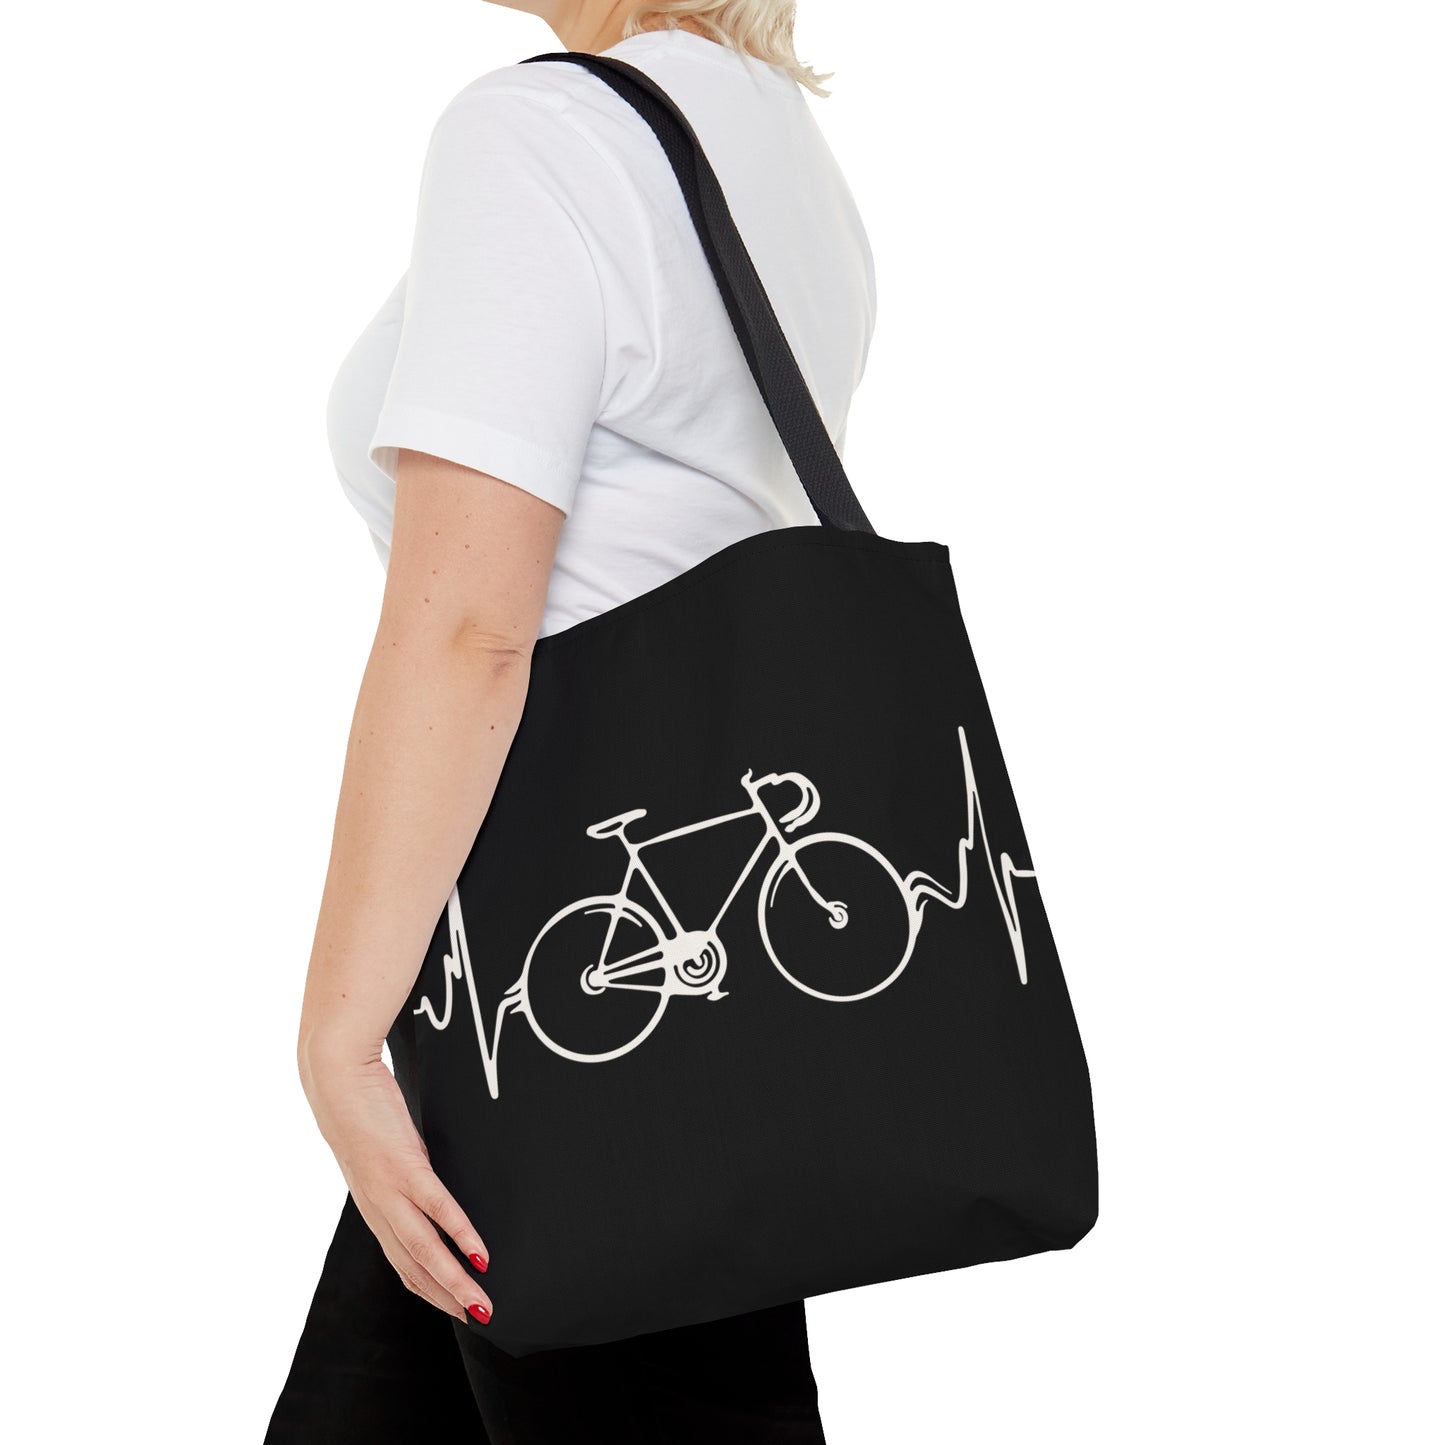 Cycling is Life tote bag